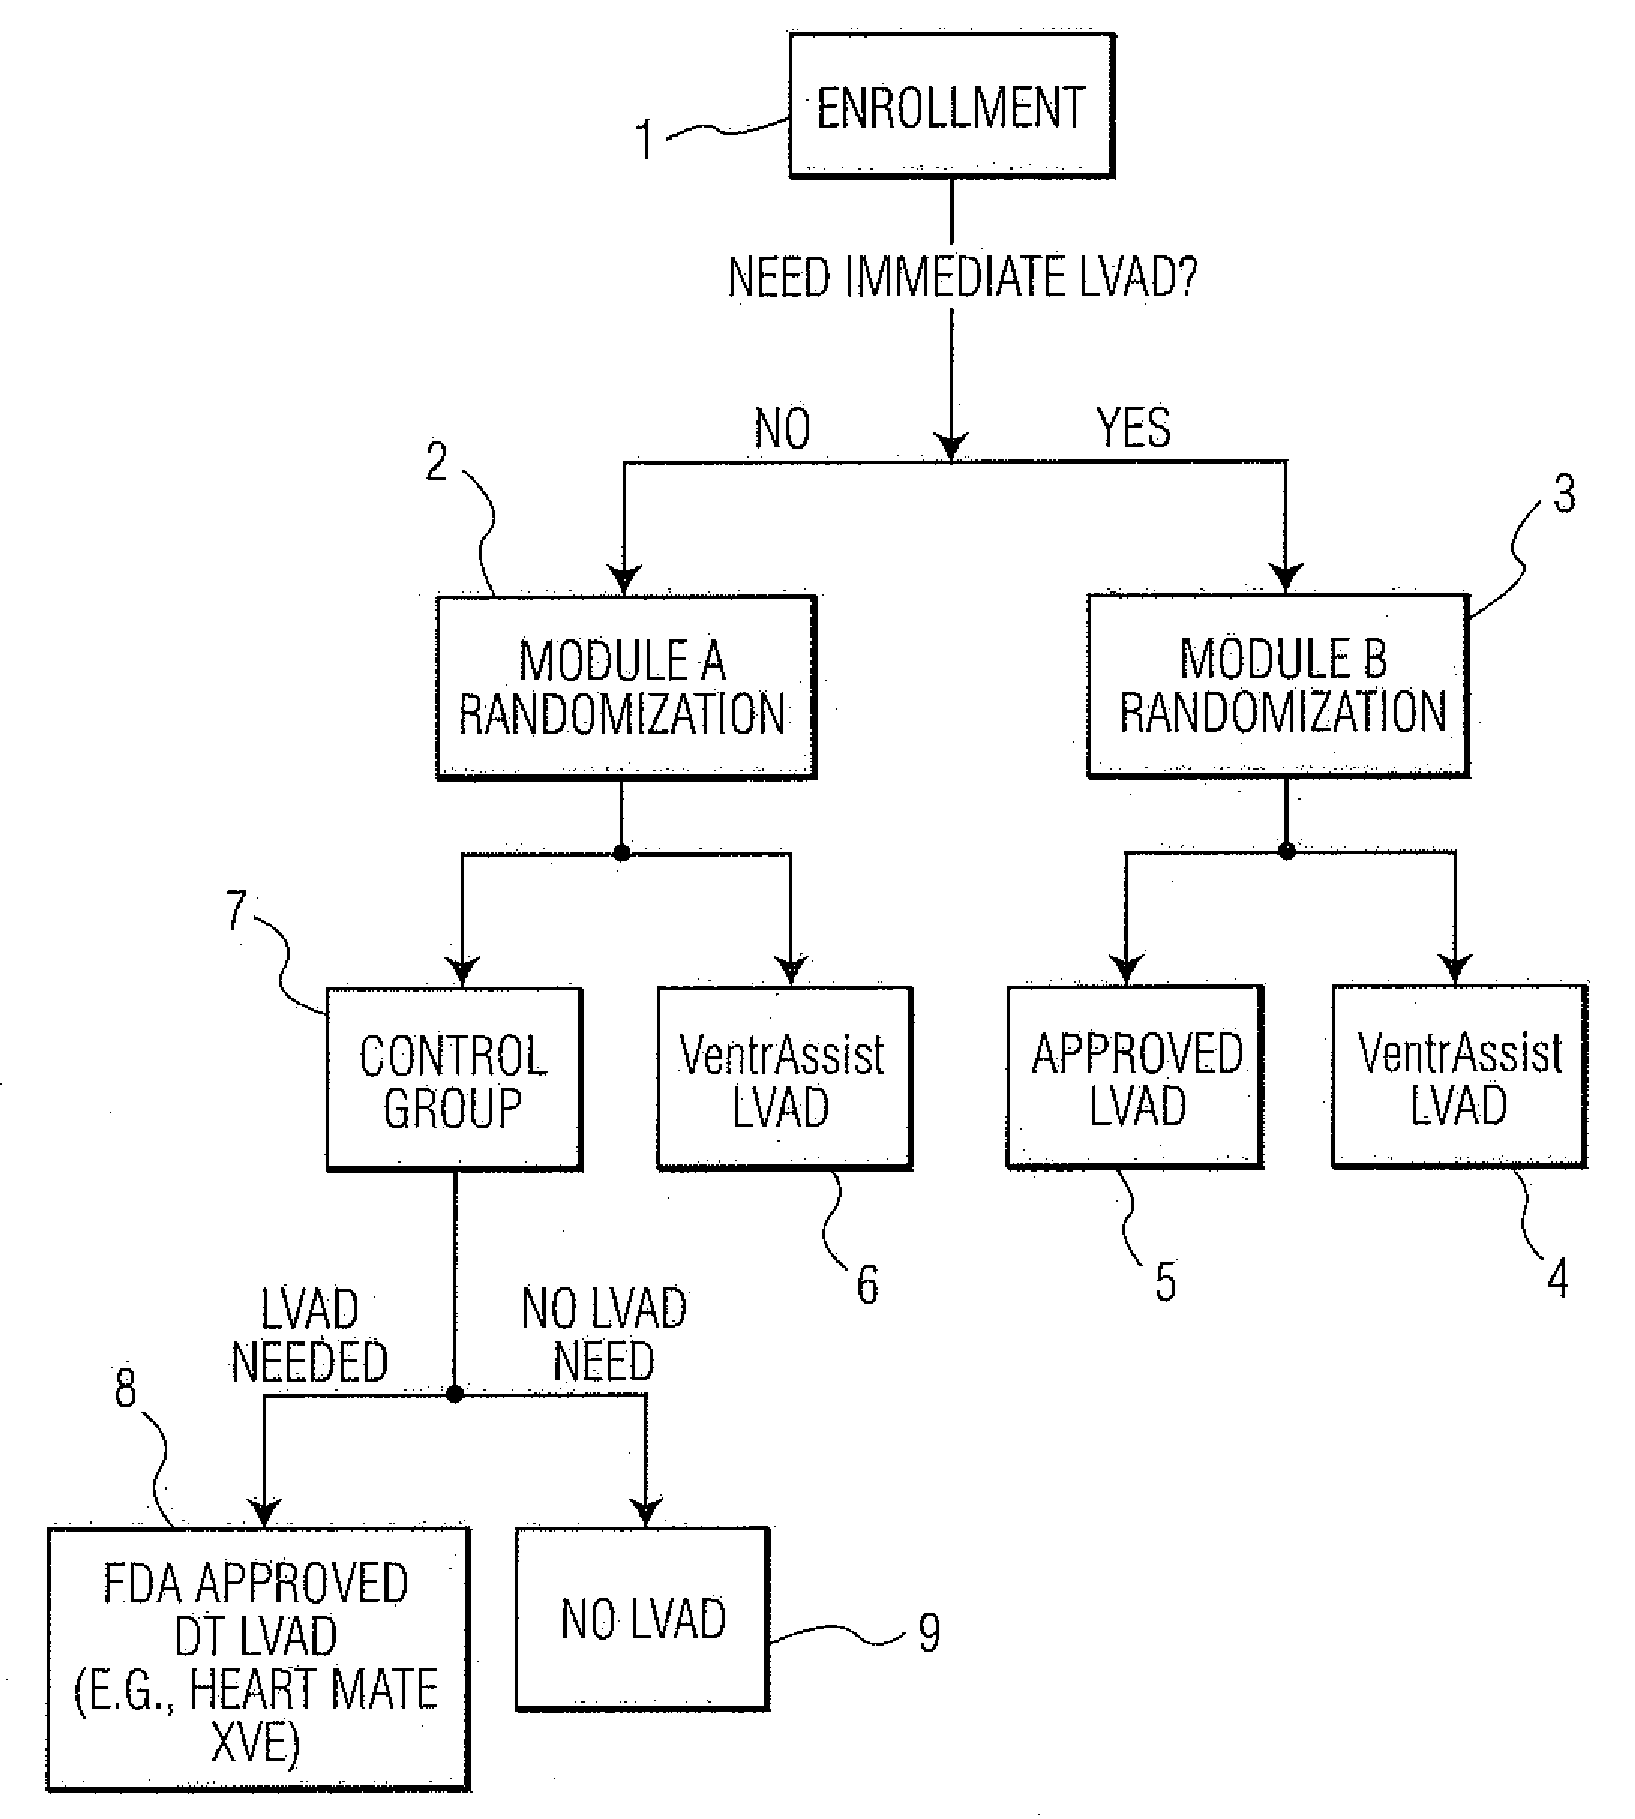 Method of conducting a clinical trial